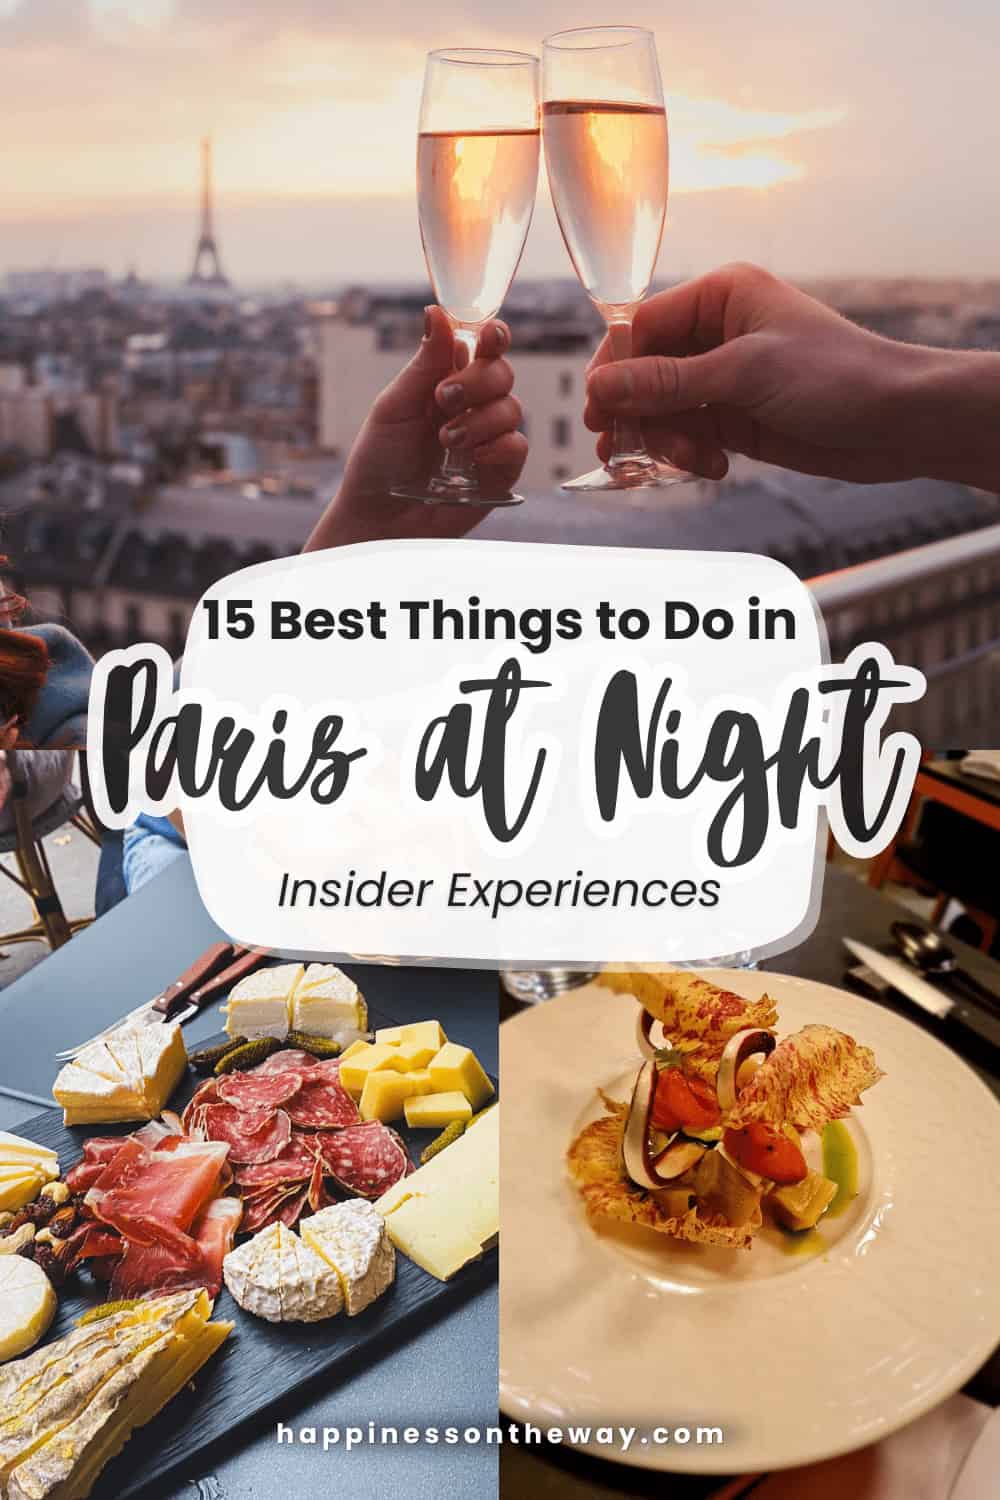 15 Best Things to Do in Paris at Night